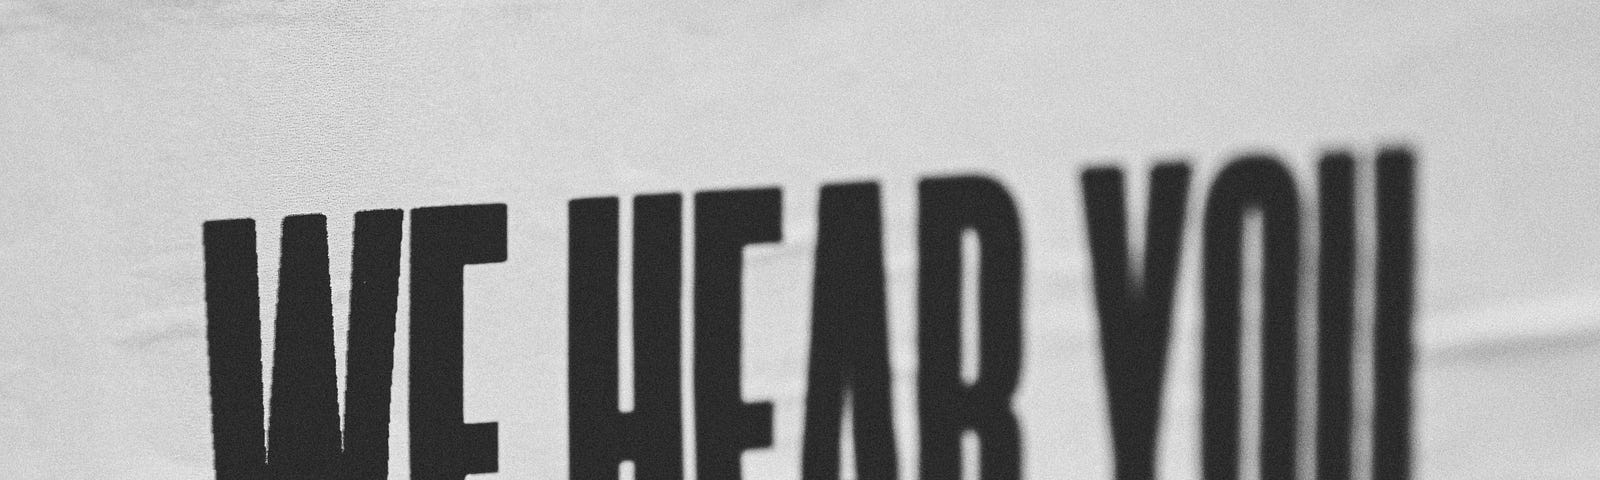 Close-up of white banner that says “We Hear You.” in bold black all-capital letters.